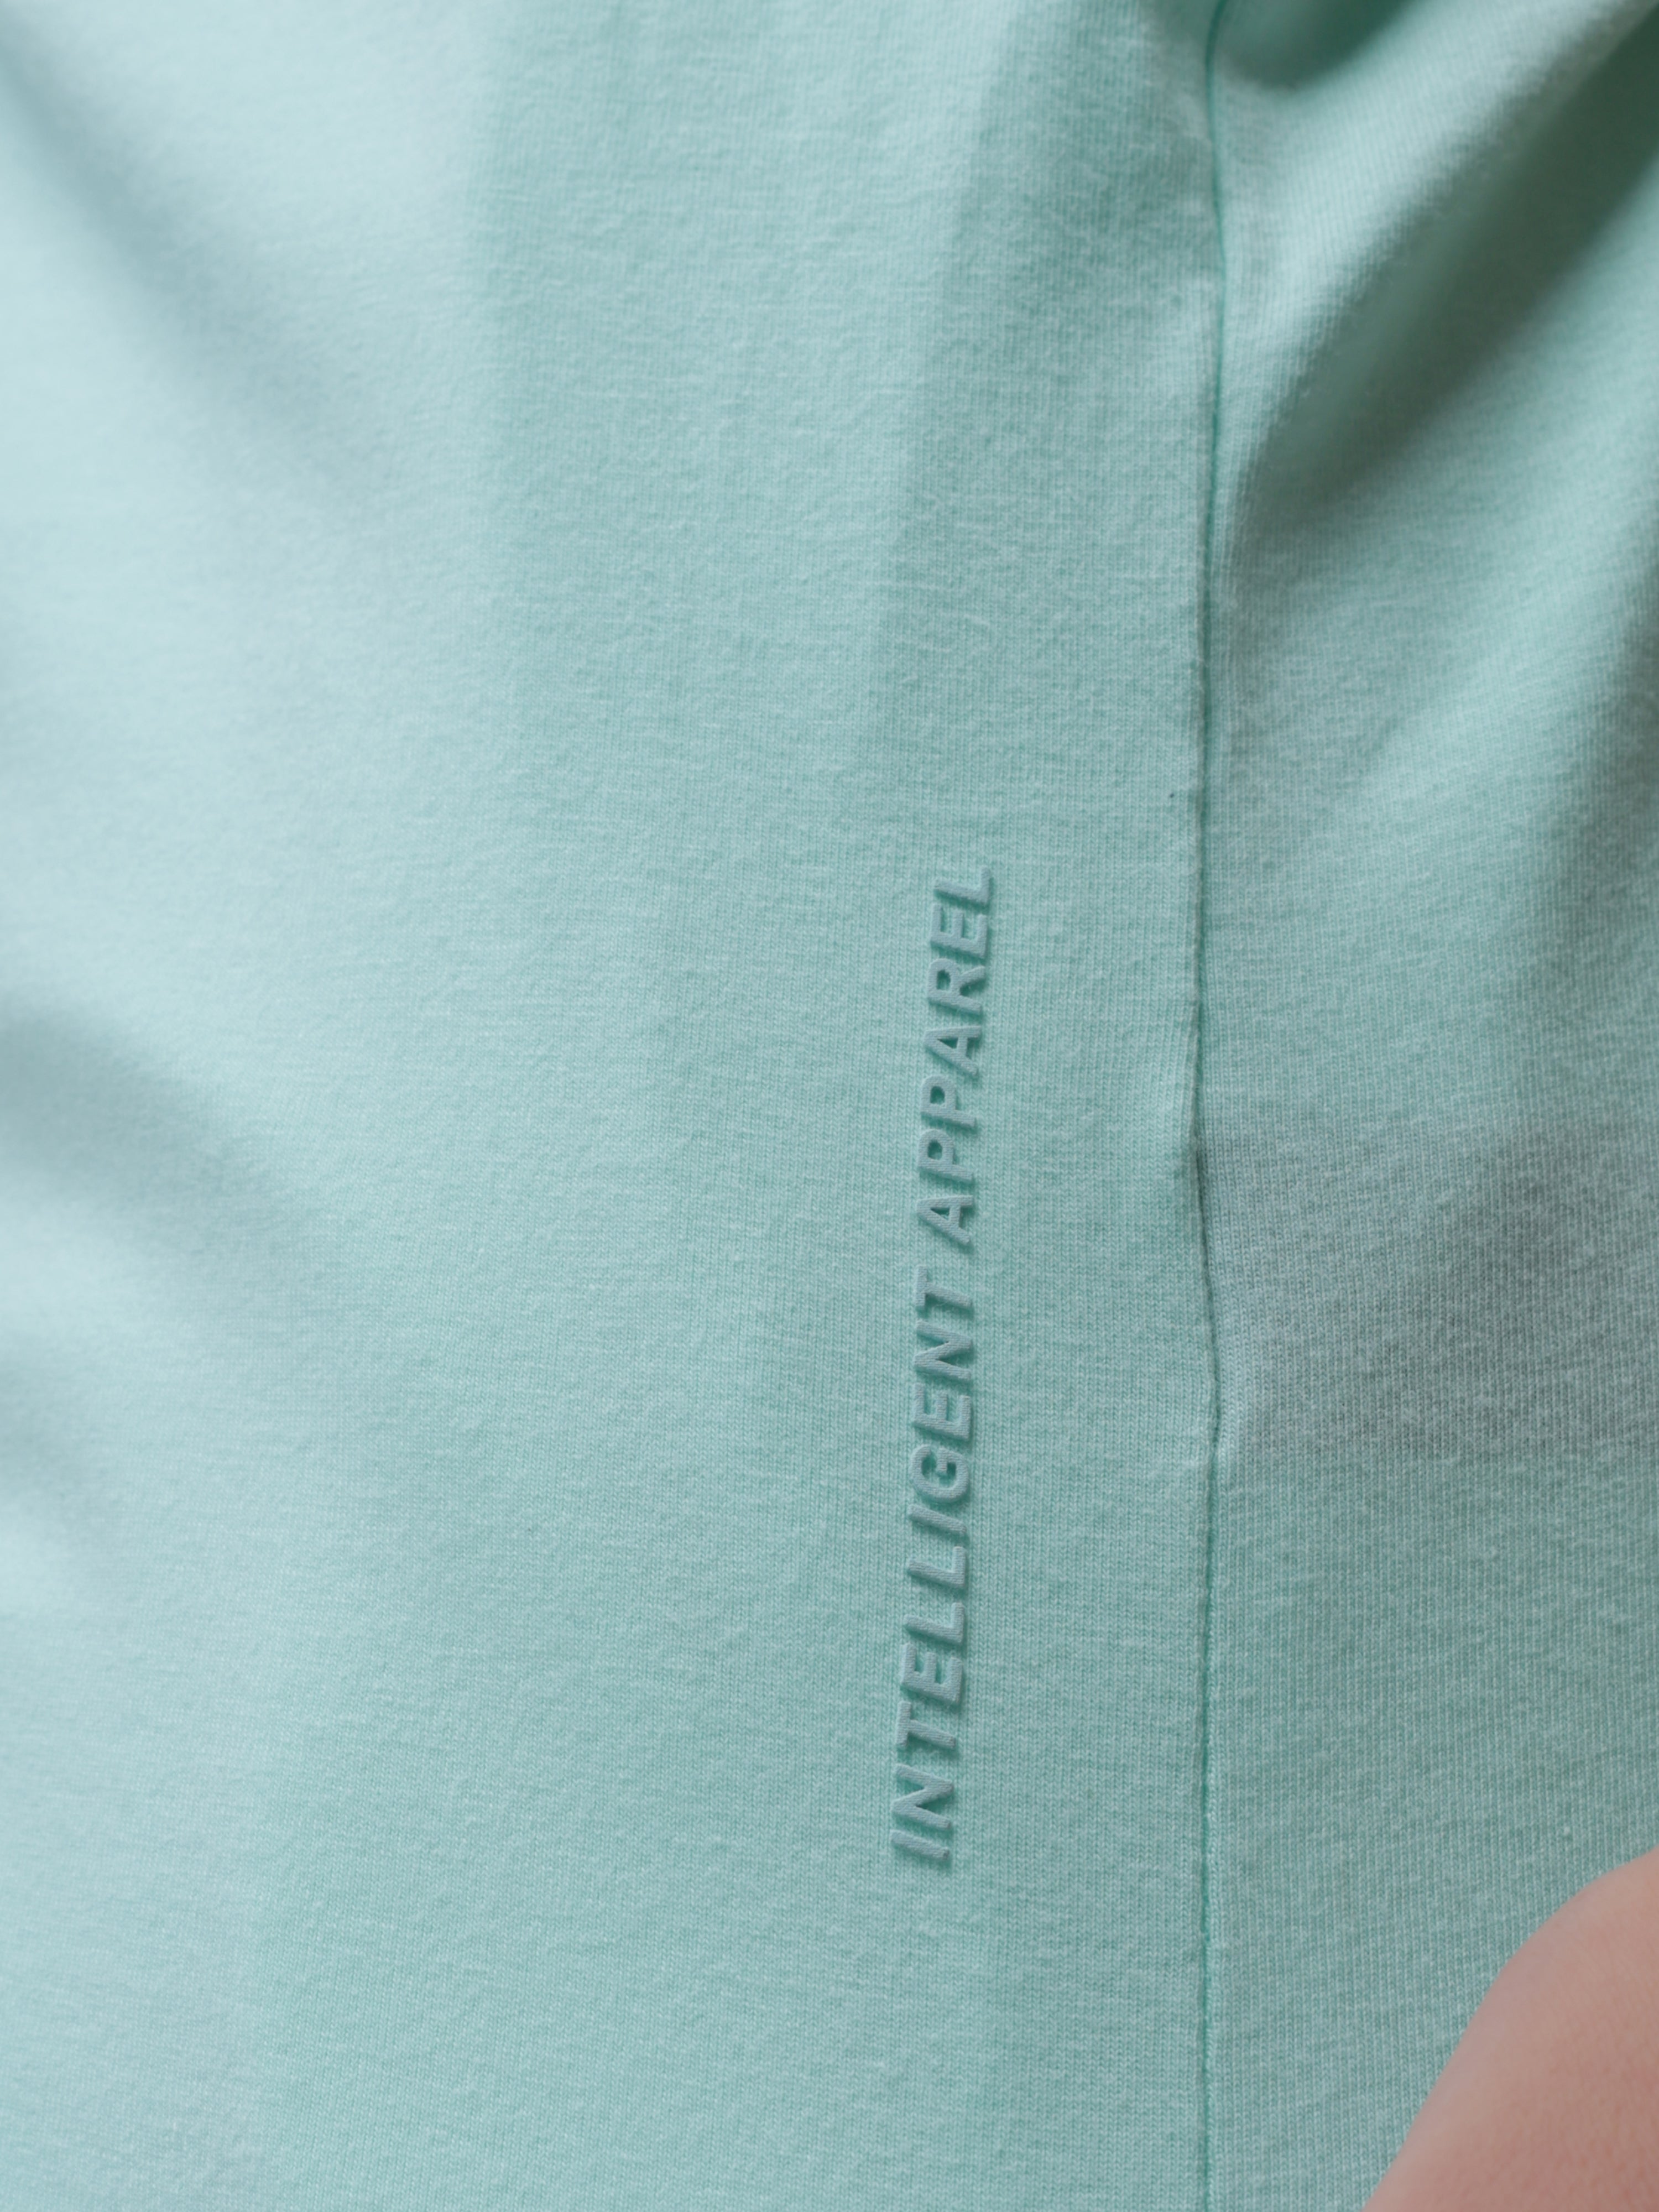 Close-up of Aqua Turms T-shirt showcasing text "INTELLIGENT APPAREL" on premium cotton fabric, highlighting advanced stain and odor-resistant technology.